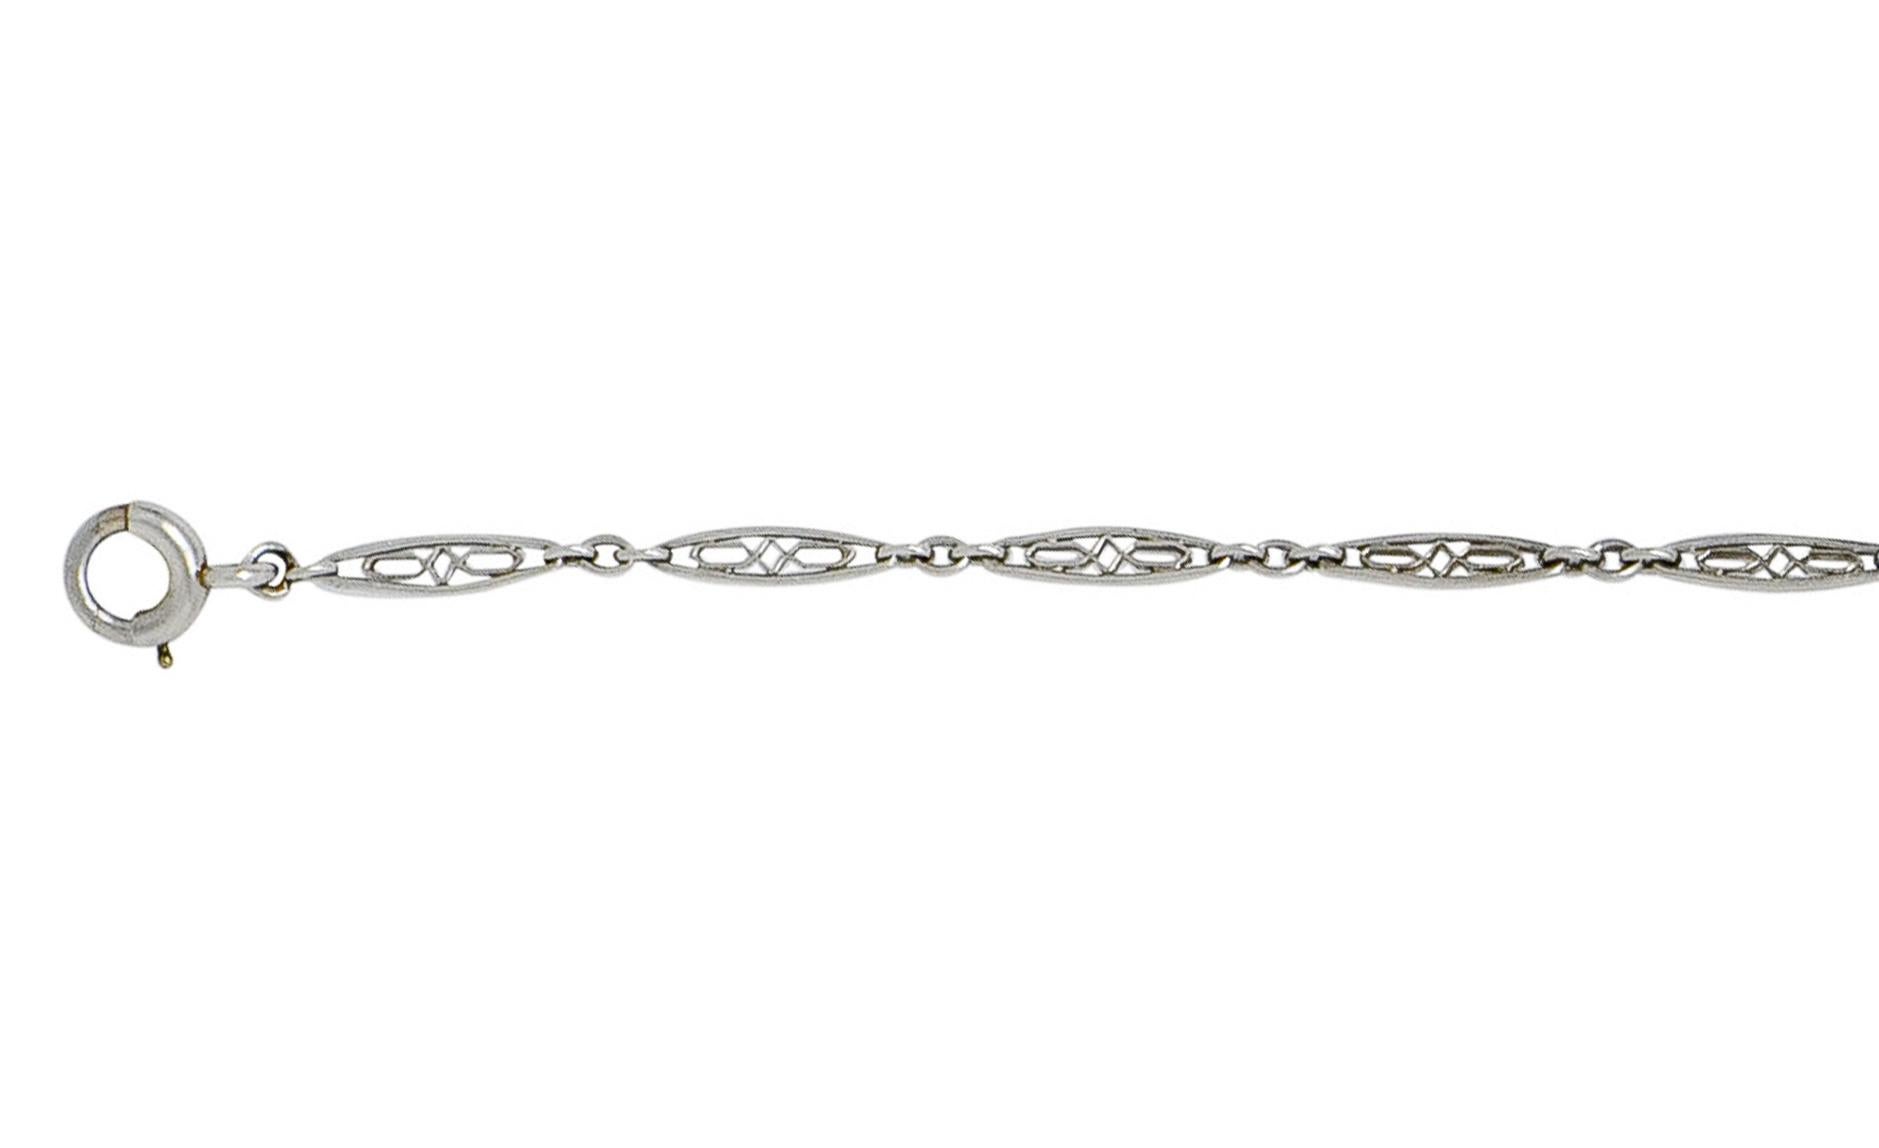 Bracelet comprised of pierced elongated links, each featuring geometric filigree

Alternating with jump ring spacer links

Completed by spring ring clasp

Tested as platinum

Circa: 1930s

Length: 7 1/4 inches

Width: 1/8 inch

Total weight: 2.0